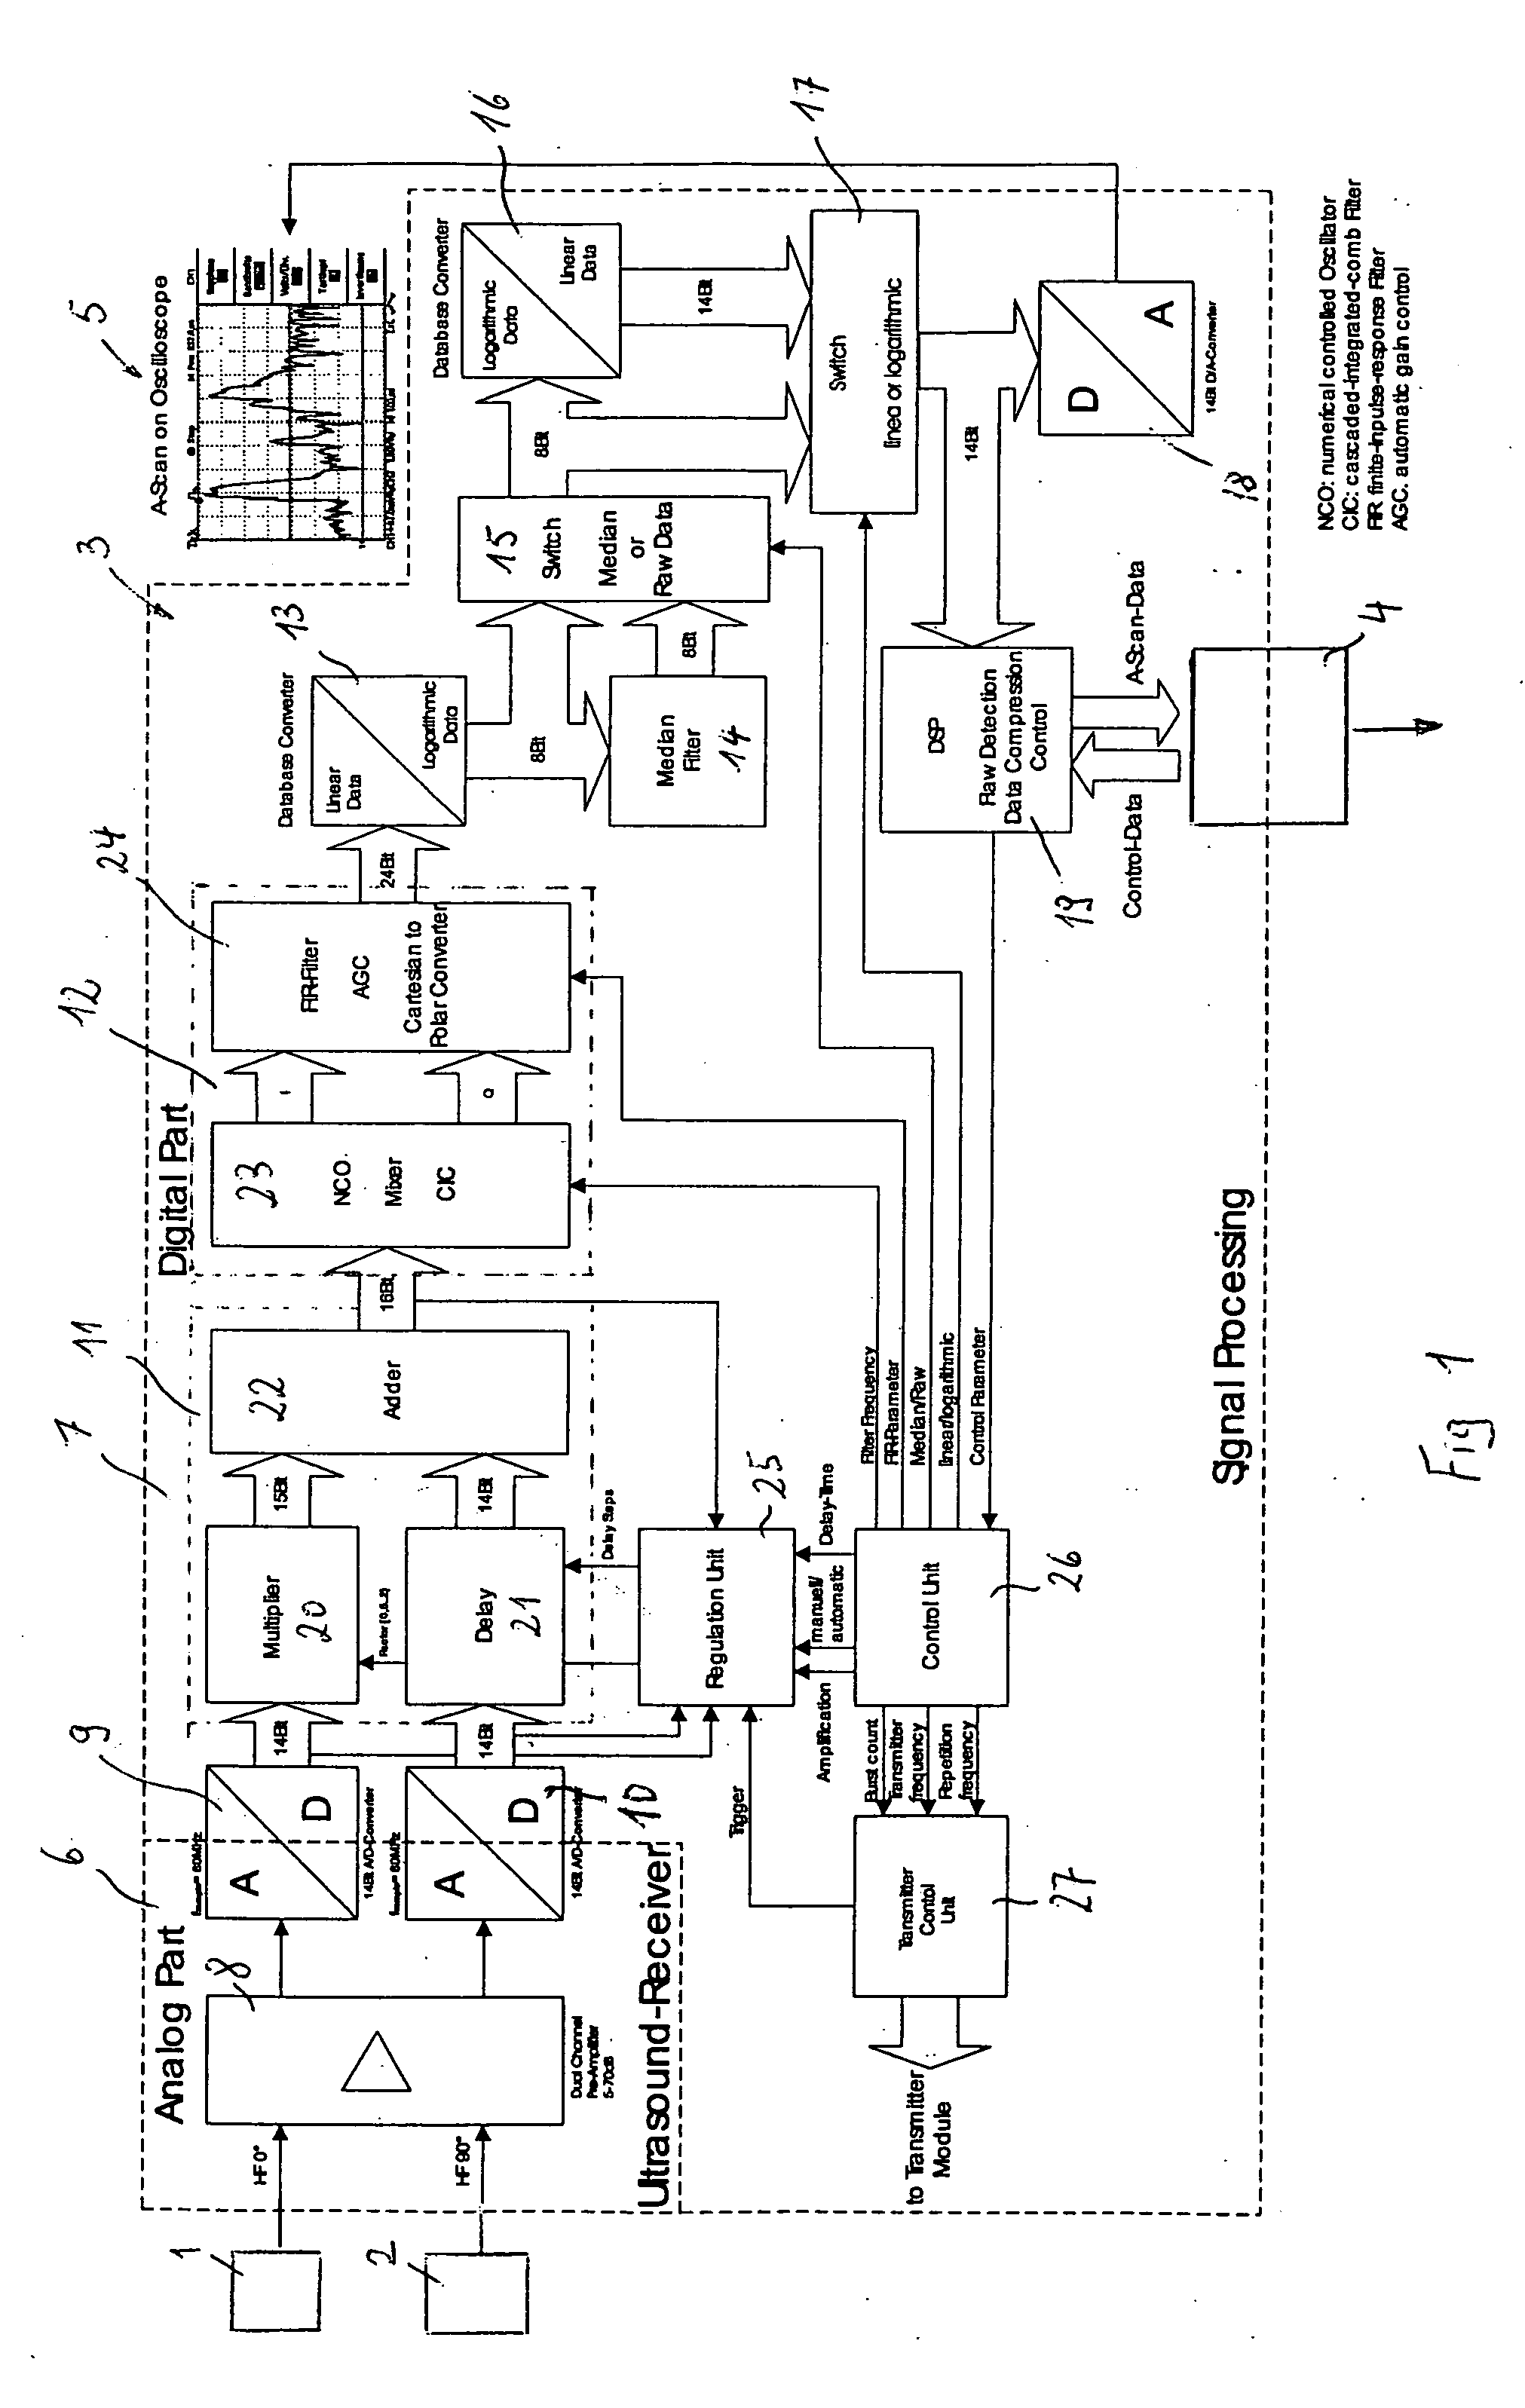 Signal processing apparatus for an ultrasound transducer, ultrasound receiver and method for operating an ultrasound receiver